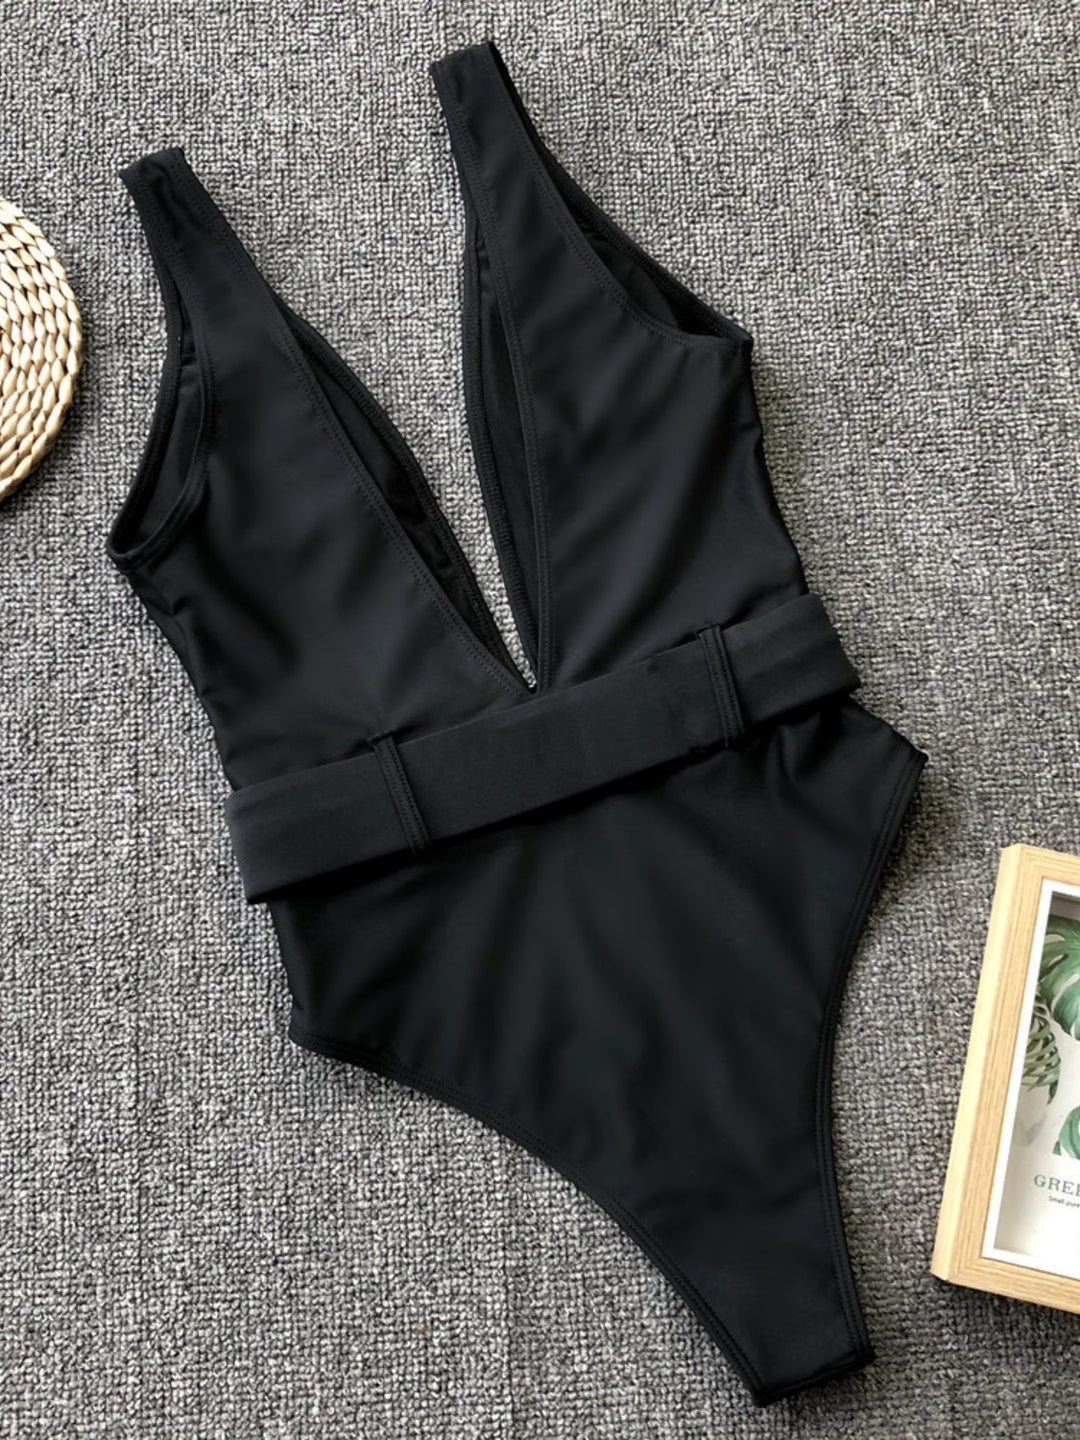 Plunge Belted One-Piece Swimwear by Coco Charli